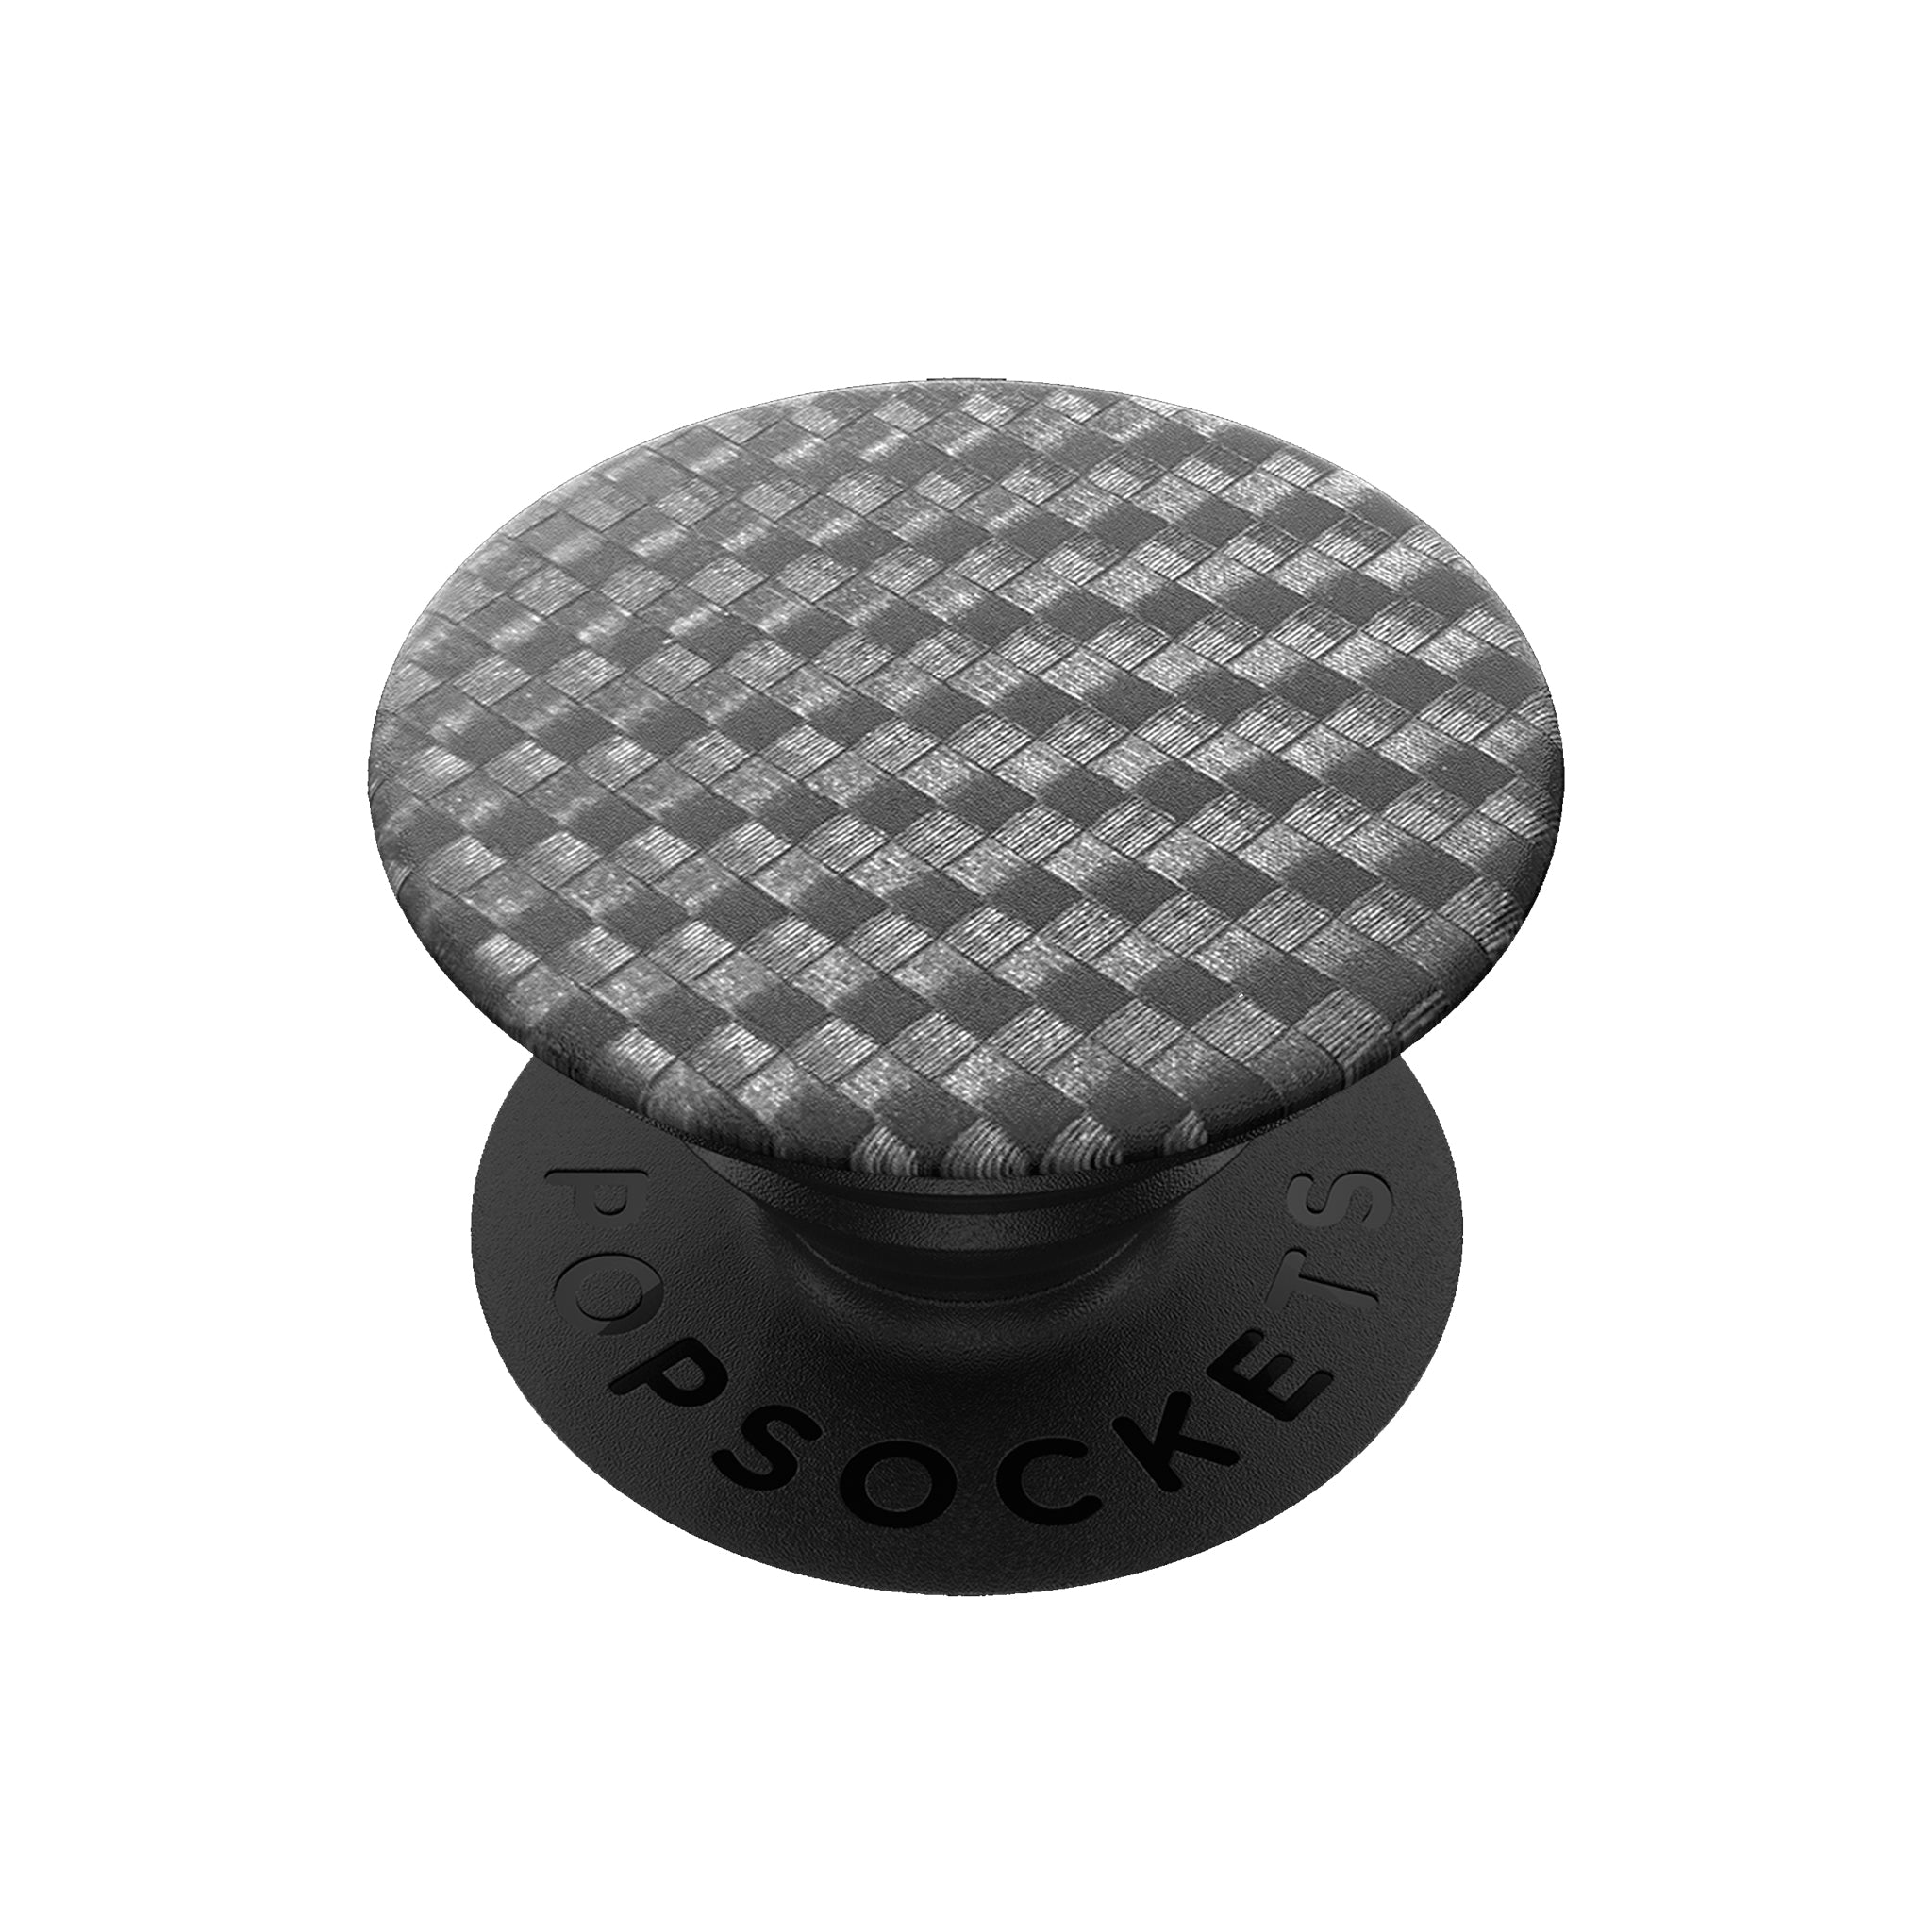 Popsockets - Popgrip Premium Swappable Device Stand And Grip - Carbonite Weave